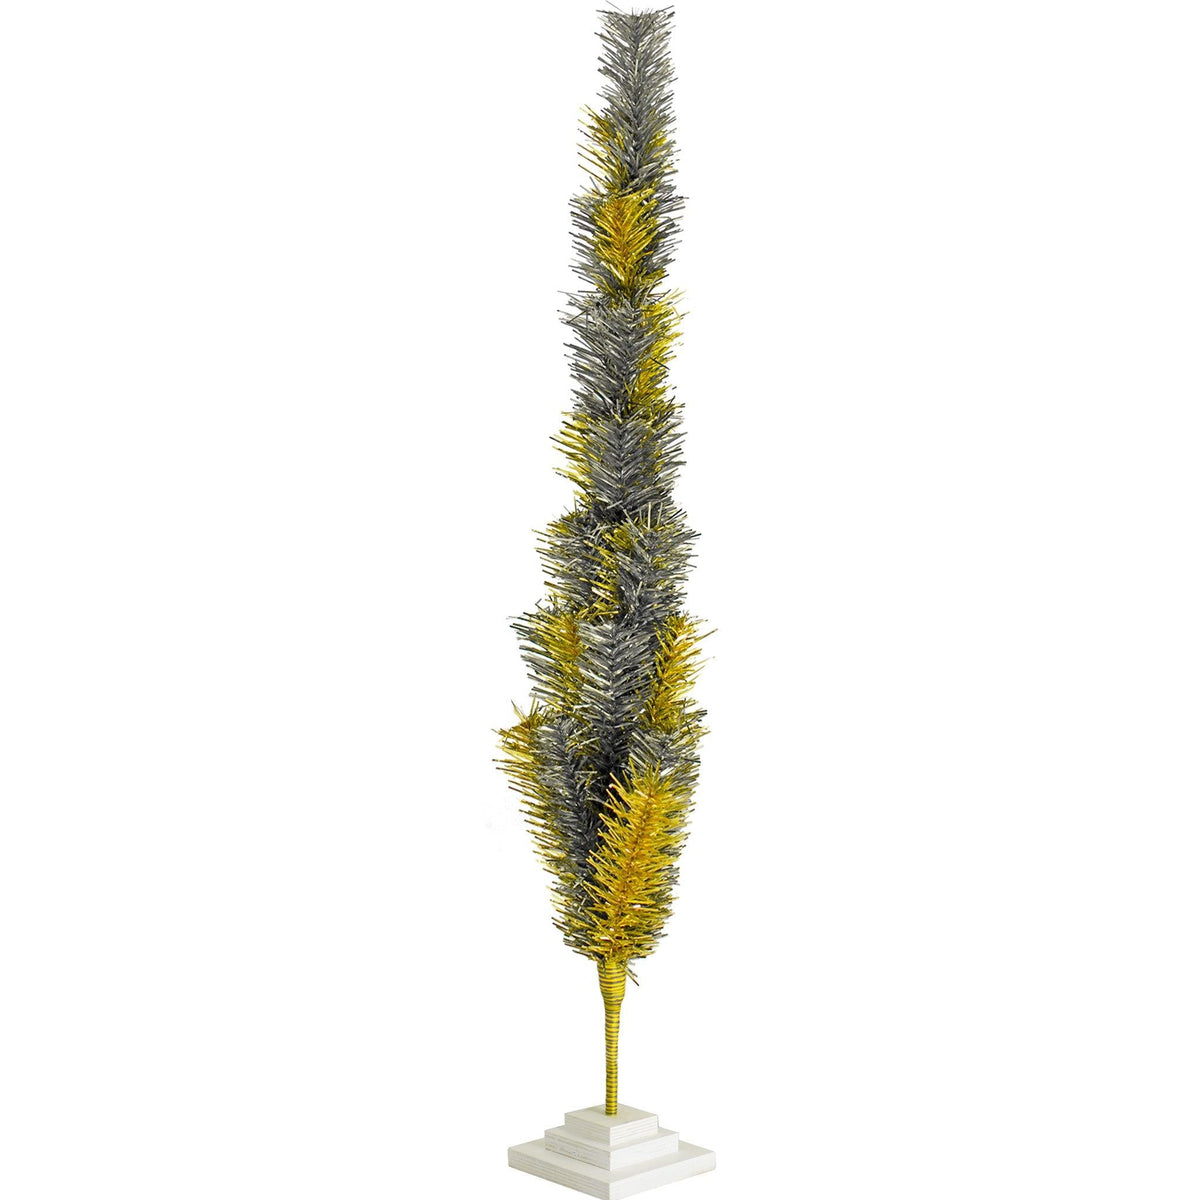 Lee Display's 48in tall Tinsel Brush Trees have fold-up branches for each shaping and storage